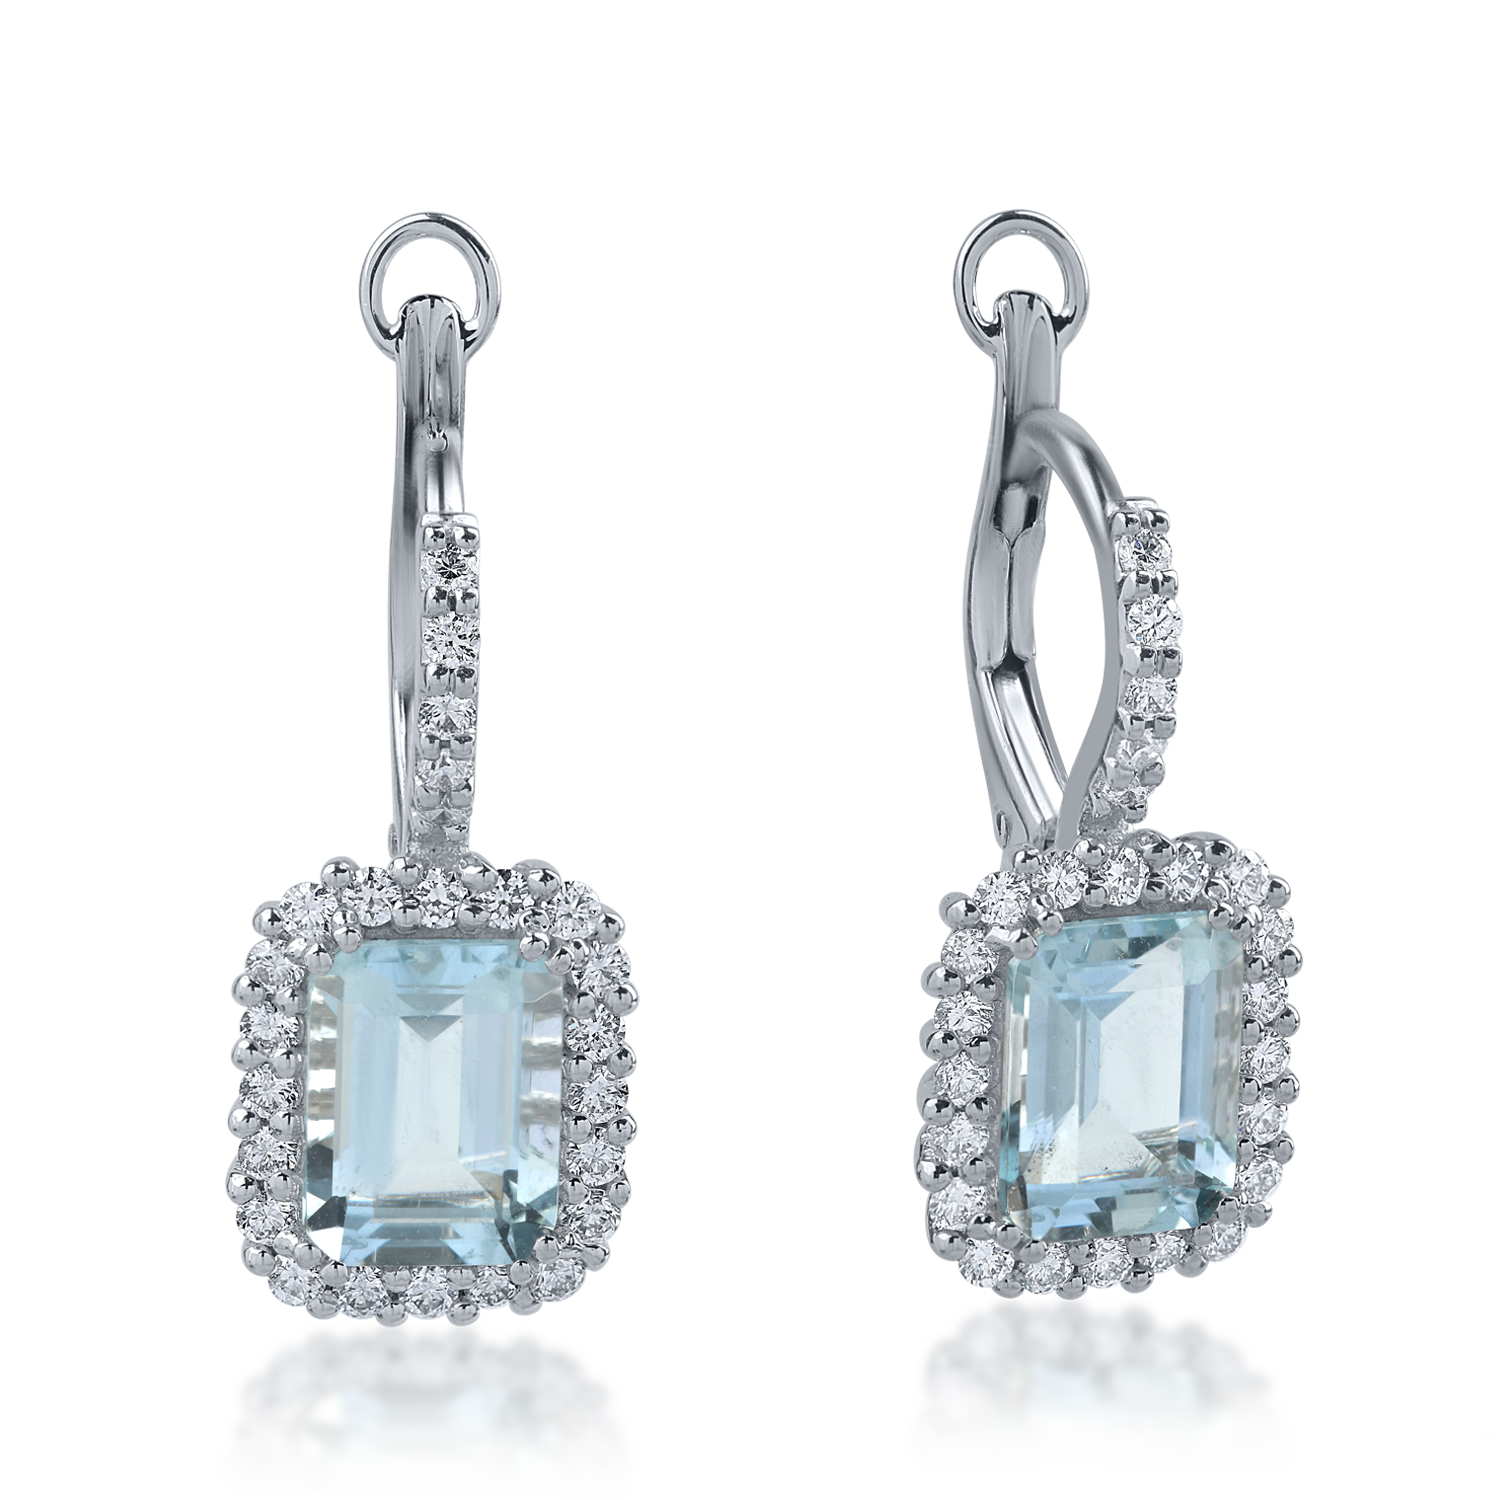 White gold earrings with 2.72ct aquamarines and 0.54ct diamonds